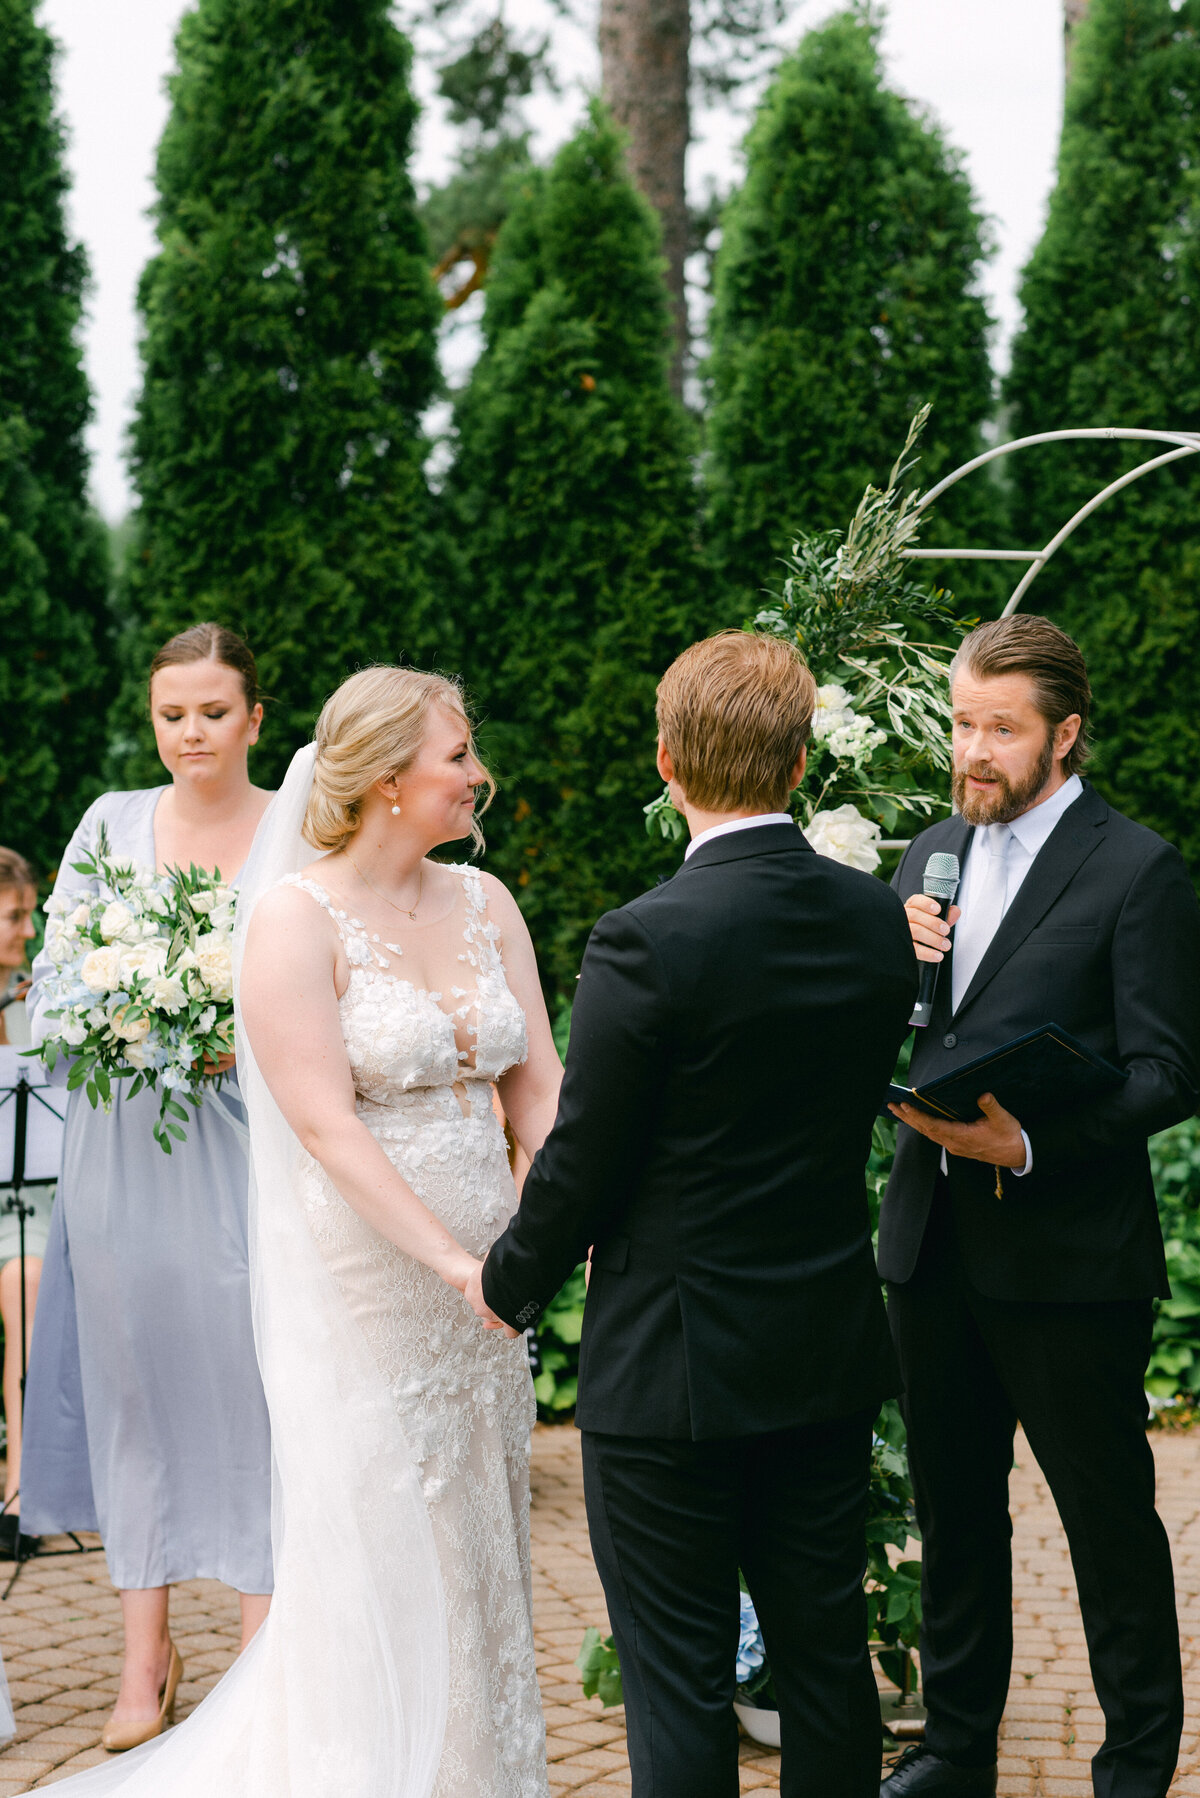 Bride and groom in the wedding ceremony in an image photographed by wedding photographer Hannika Gabrielsson.